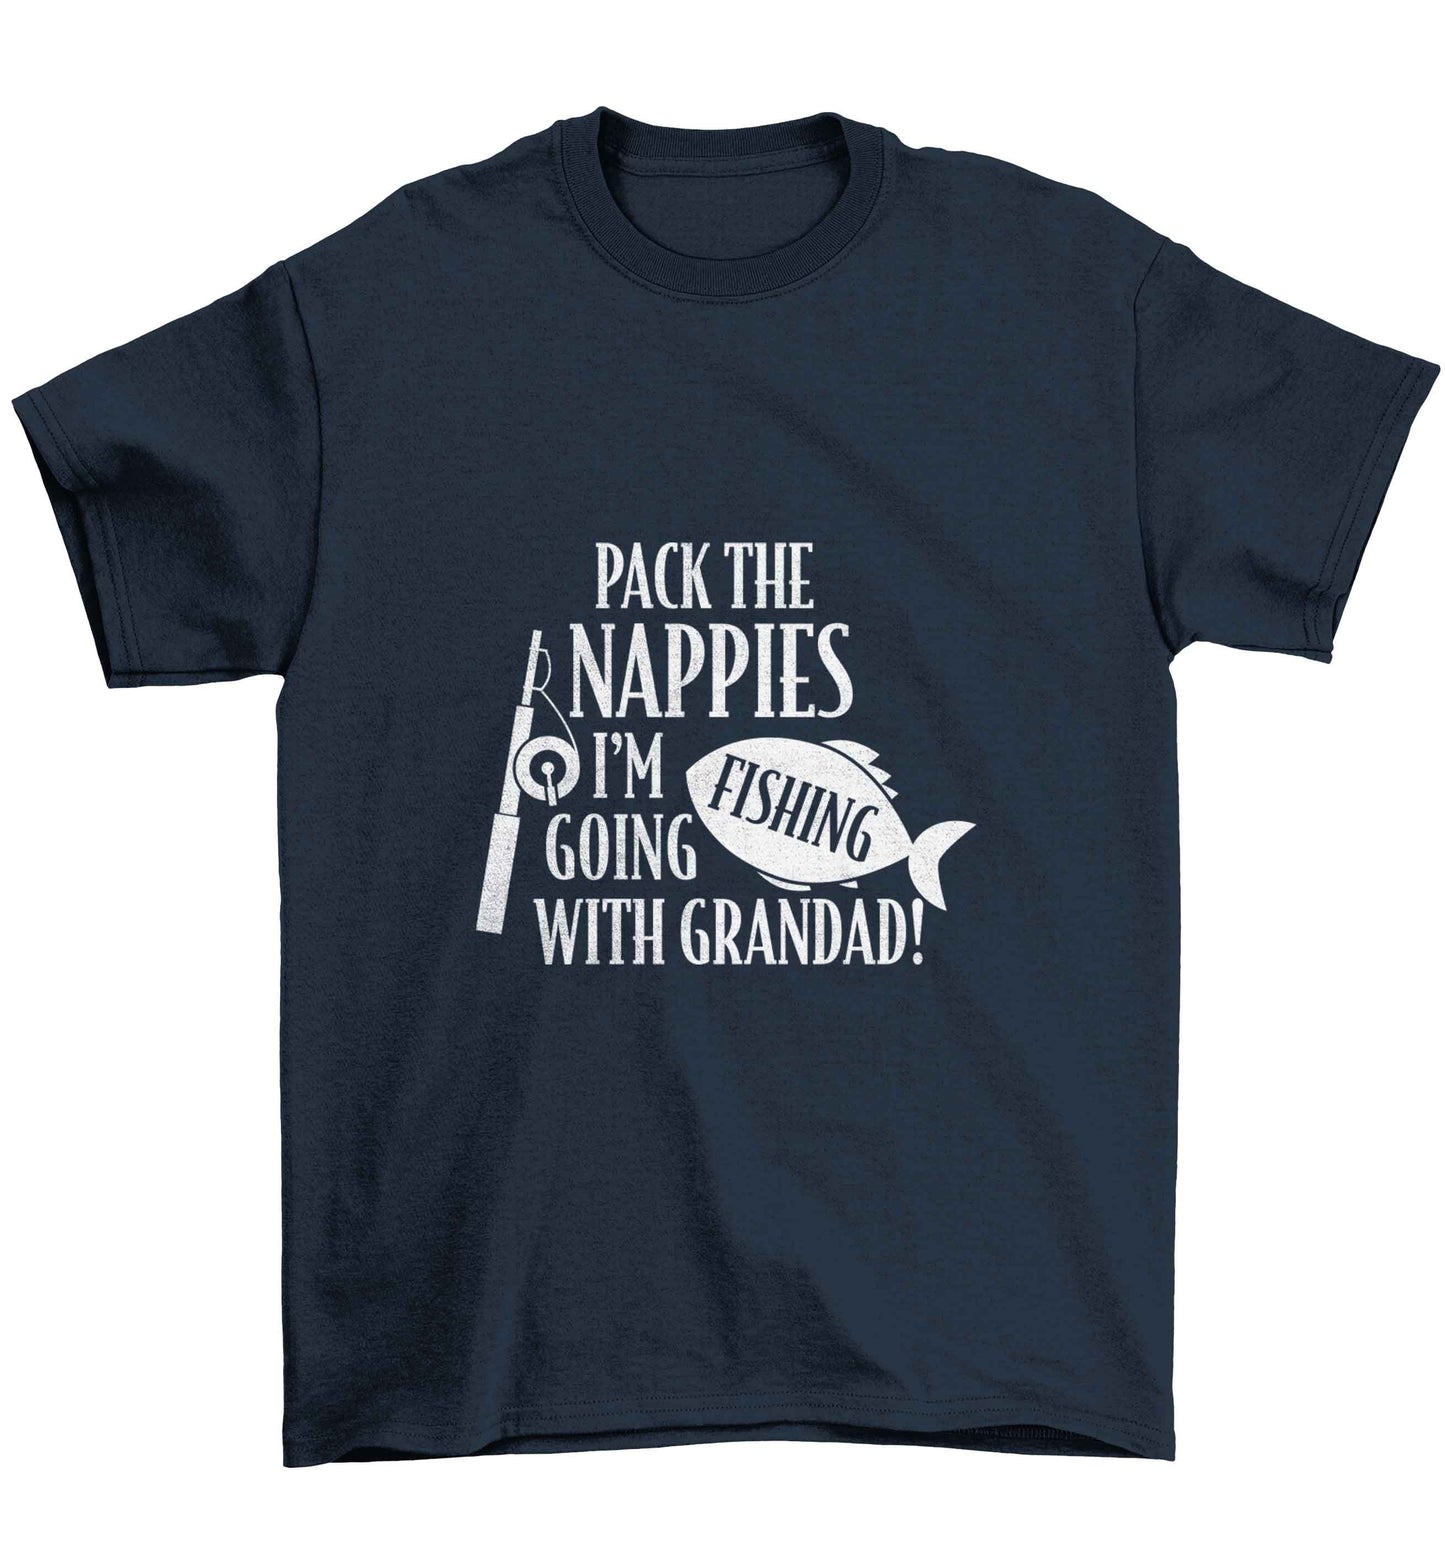 Pack the nappies I'm going fishing with Grandad Children's navy Tshirt 12-13 Years